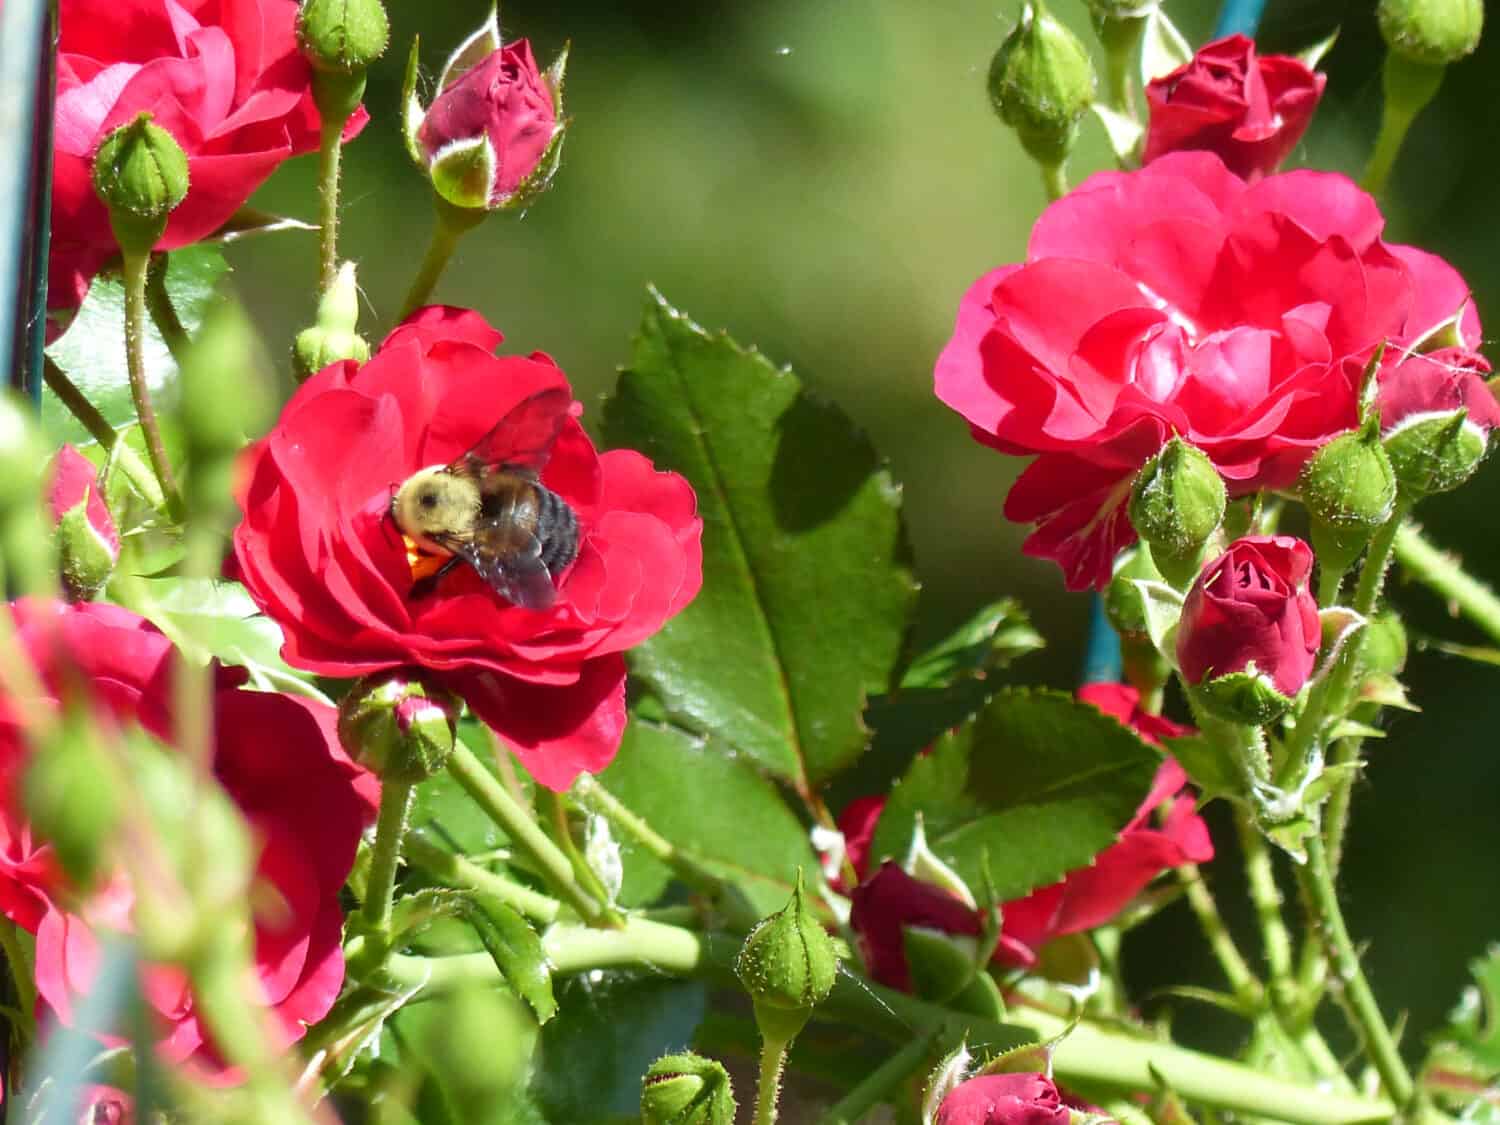 Red Meidiland Rose blossoms with bumble bee or carpenter bee pollinating.